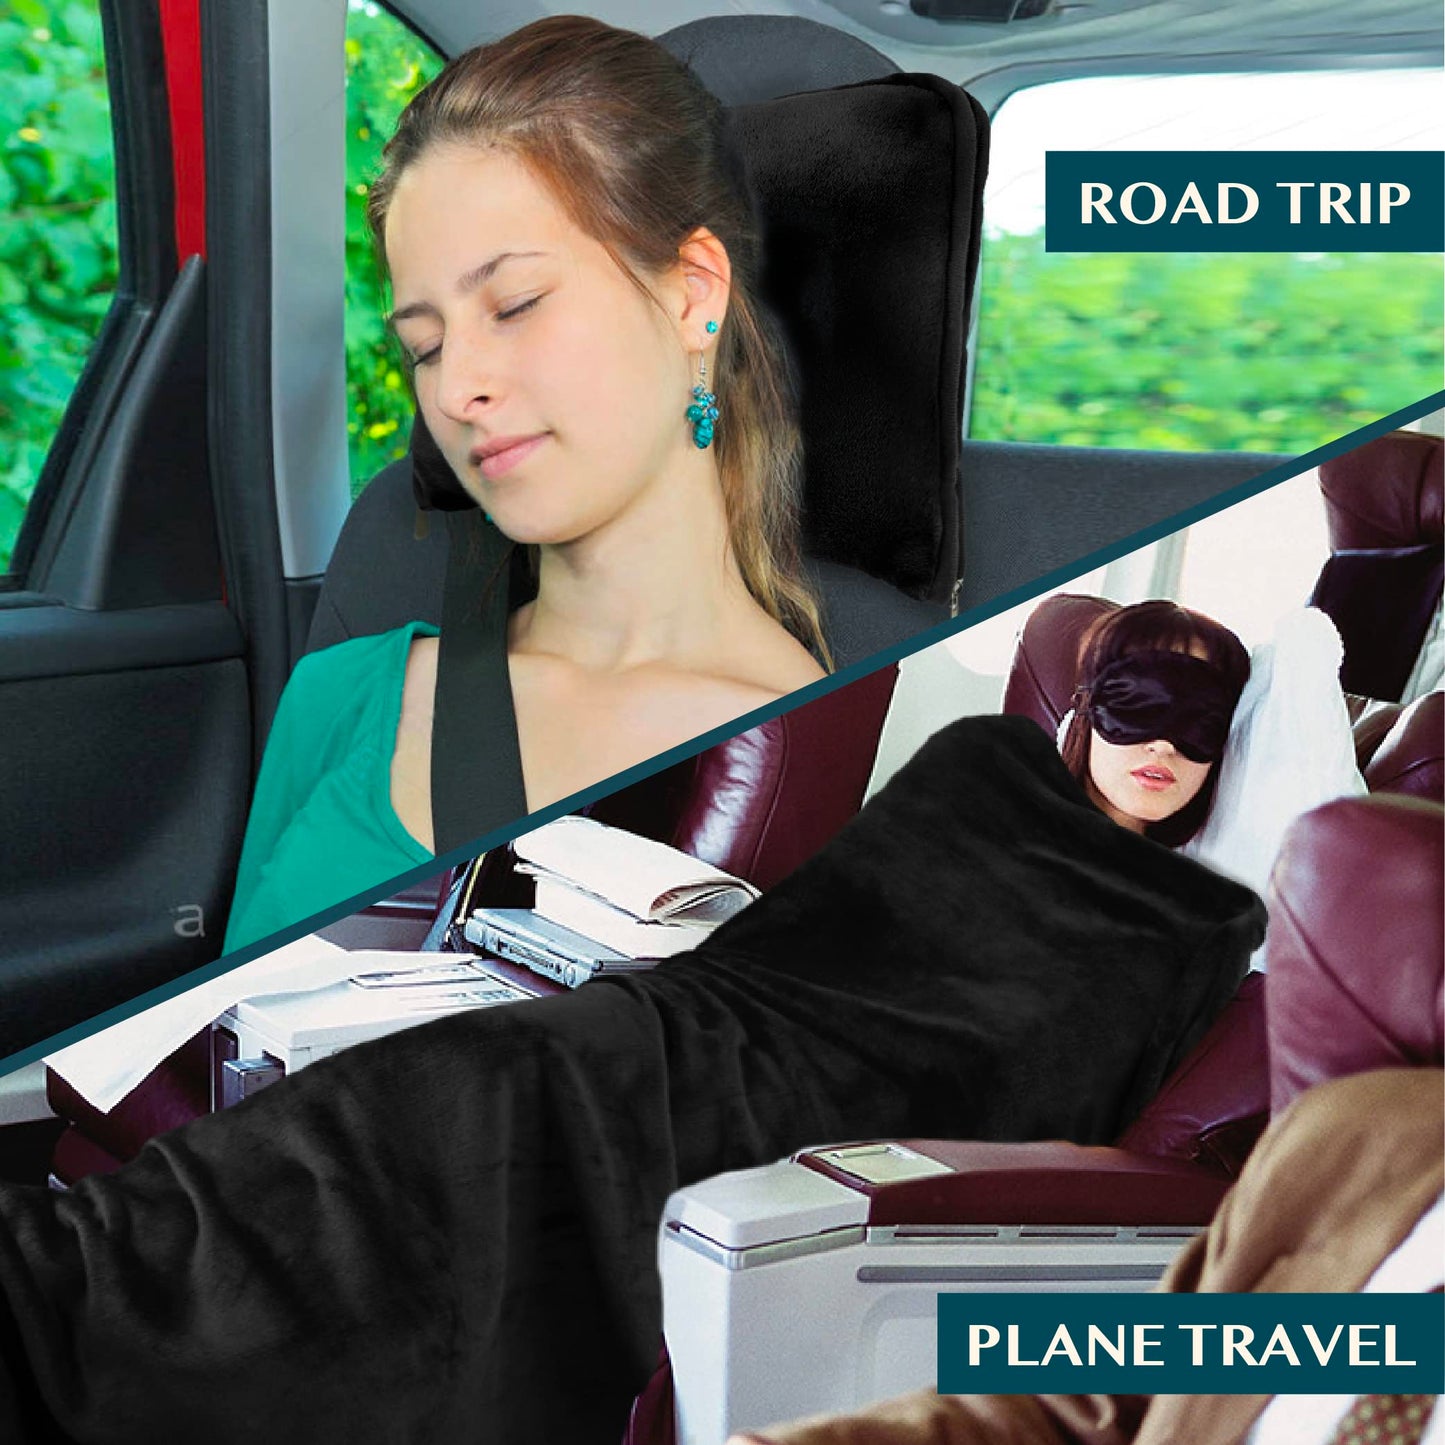 PAVILIA Travel Blanket Pillow, Soft Airplane Blanket 2-in-1 Combo Set, Plane Blanket Compact Packable, Flight Essentials Car Pillow, Travelers Gifts Accessories, Luggage Backpack Strap, 60x43 Black